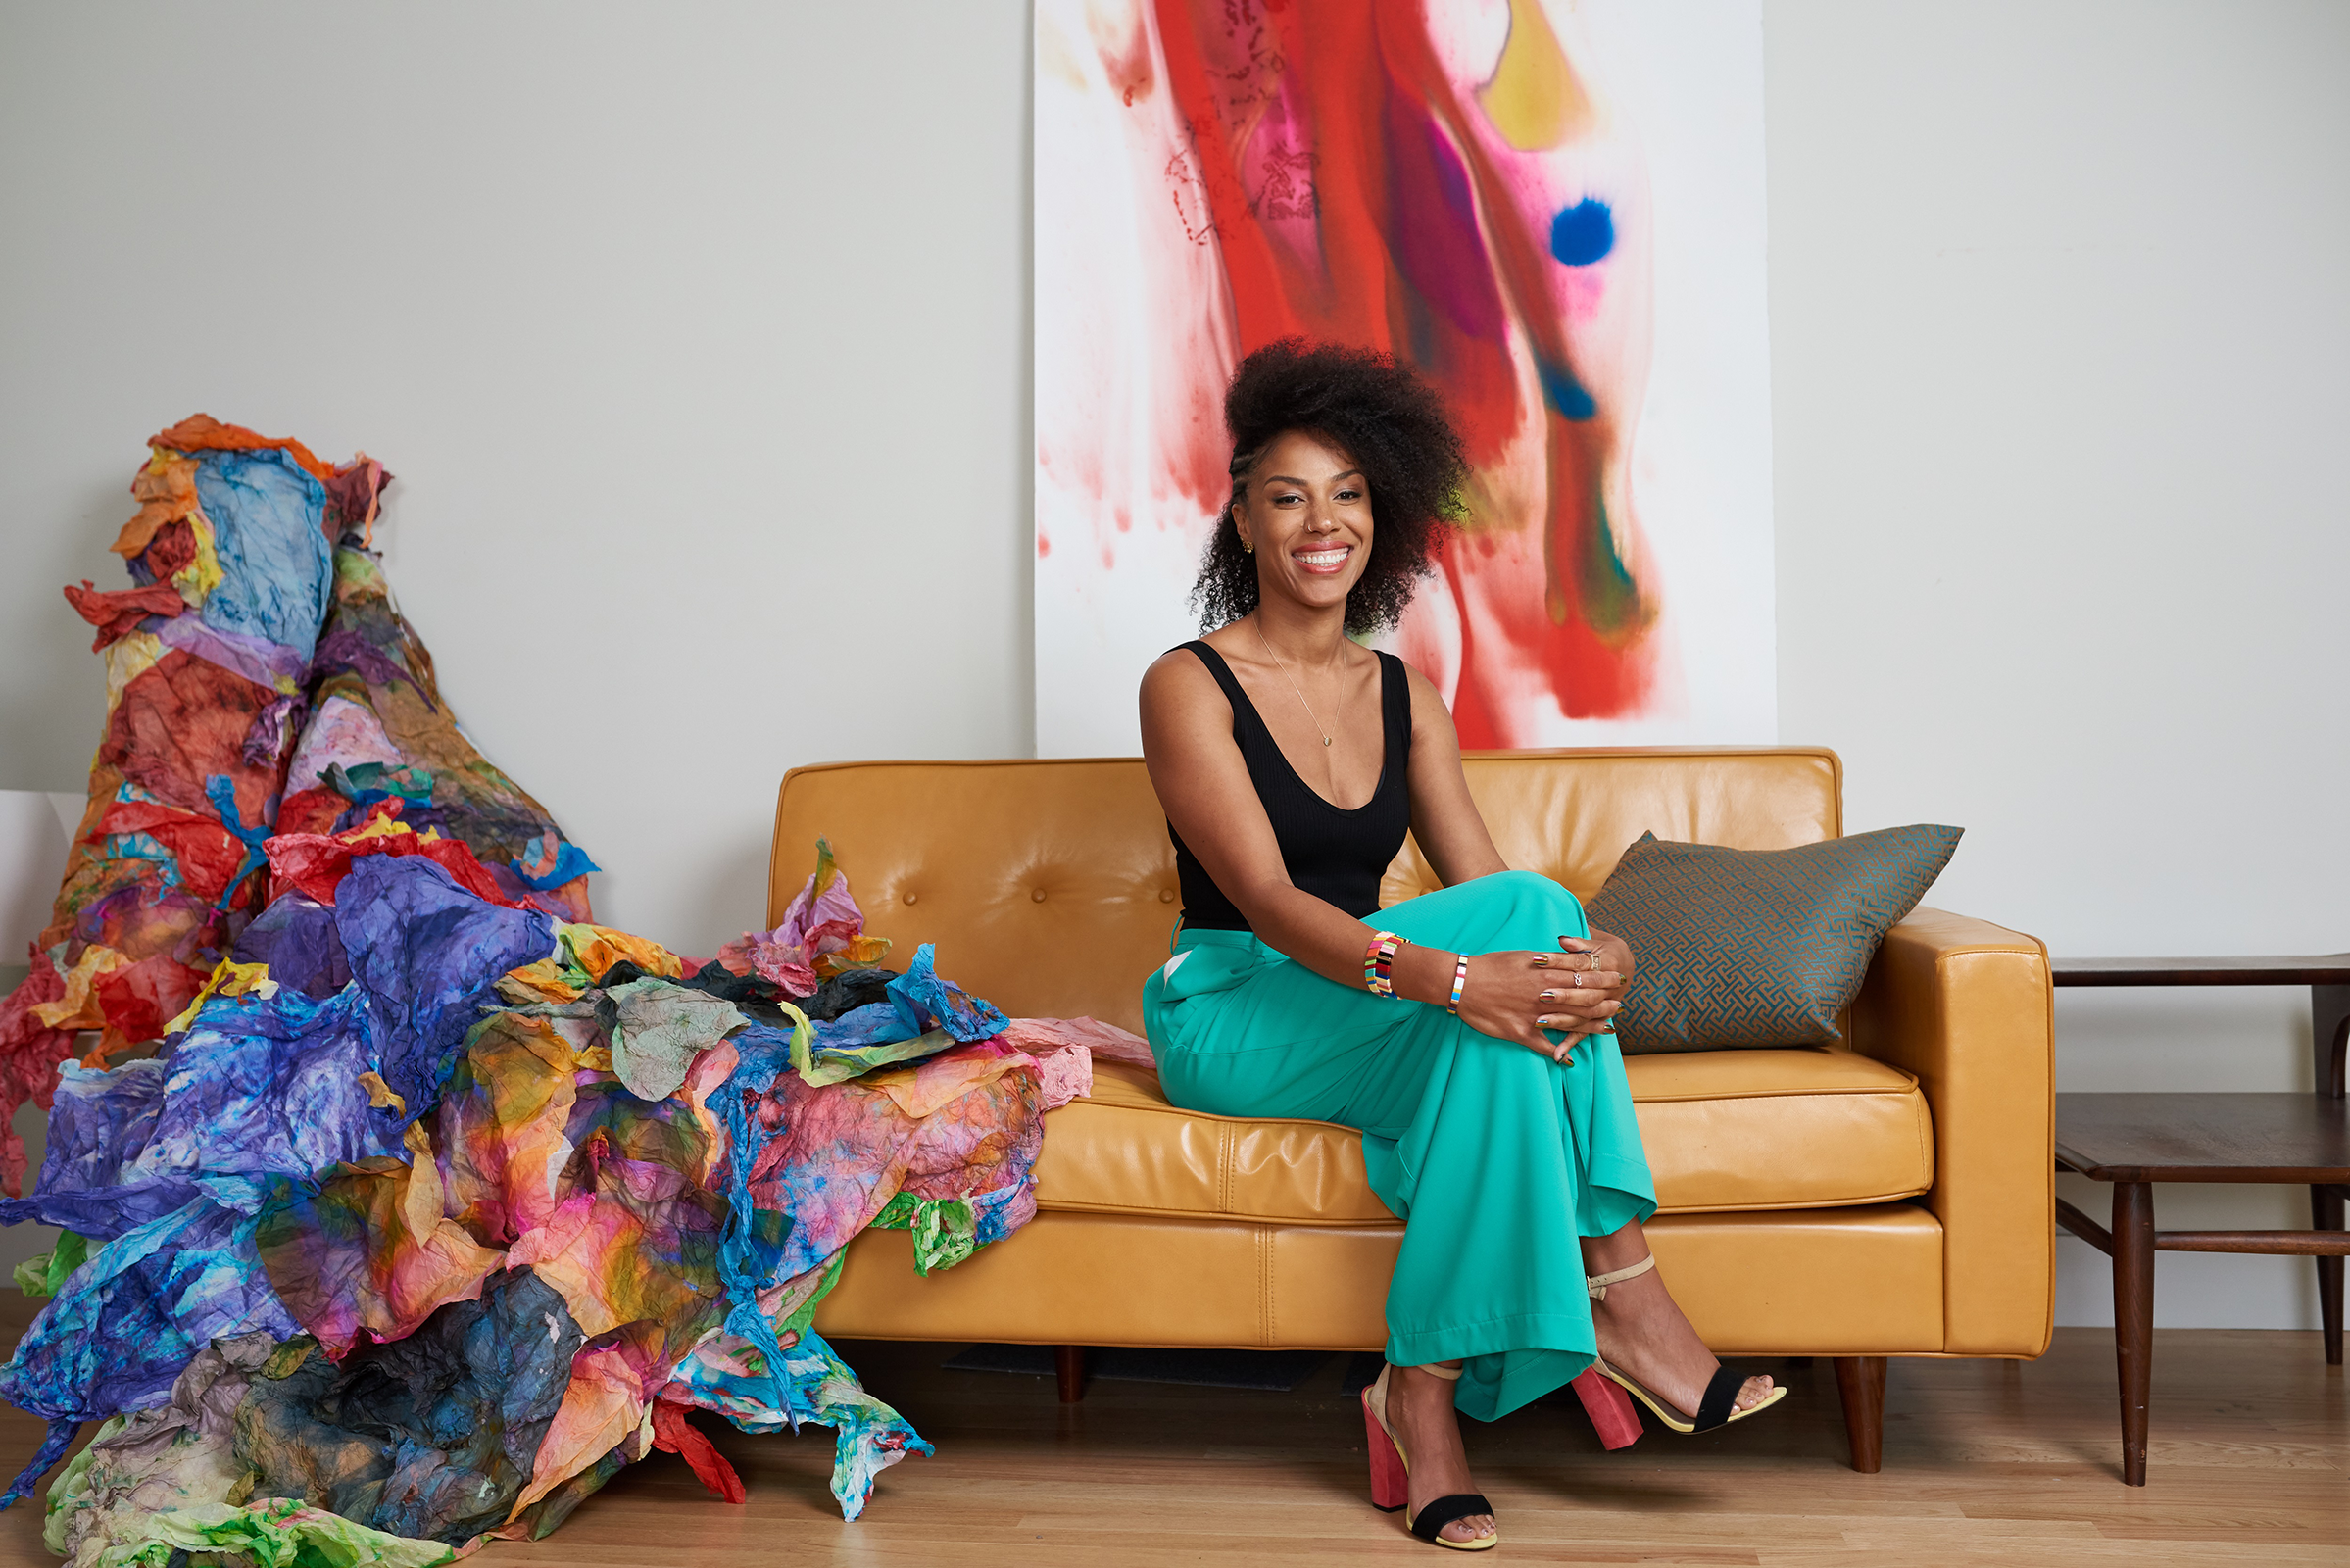 A radiant artist sits gracefully on a tan leather couch, her wide smile as engaging as the colorful art that surrounds her. She's dressed in a stylish black tank top paired with flowing teal trousers, and her red and gold heels add a pop of contrast. Her natural hair is styled in a stunning afro, and her wrists are adorned with colorful bracelets, mirroring the exuberance of the art piece. To her left, a striking sculpture made of crinkled, multicolored paper cascades onto the floor, while a large, abstract painting with swirls of red, blue, and yellow adds a dynamic backdrop to this creative scene.